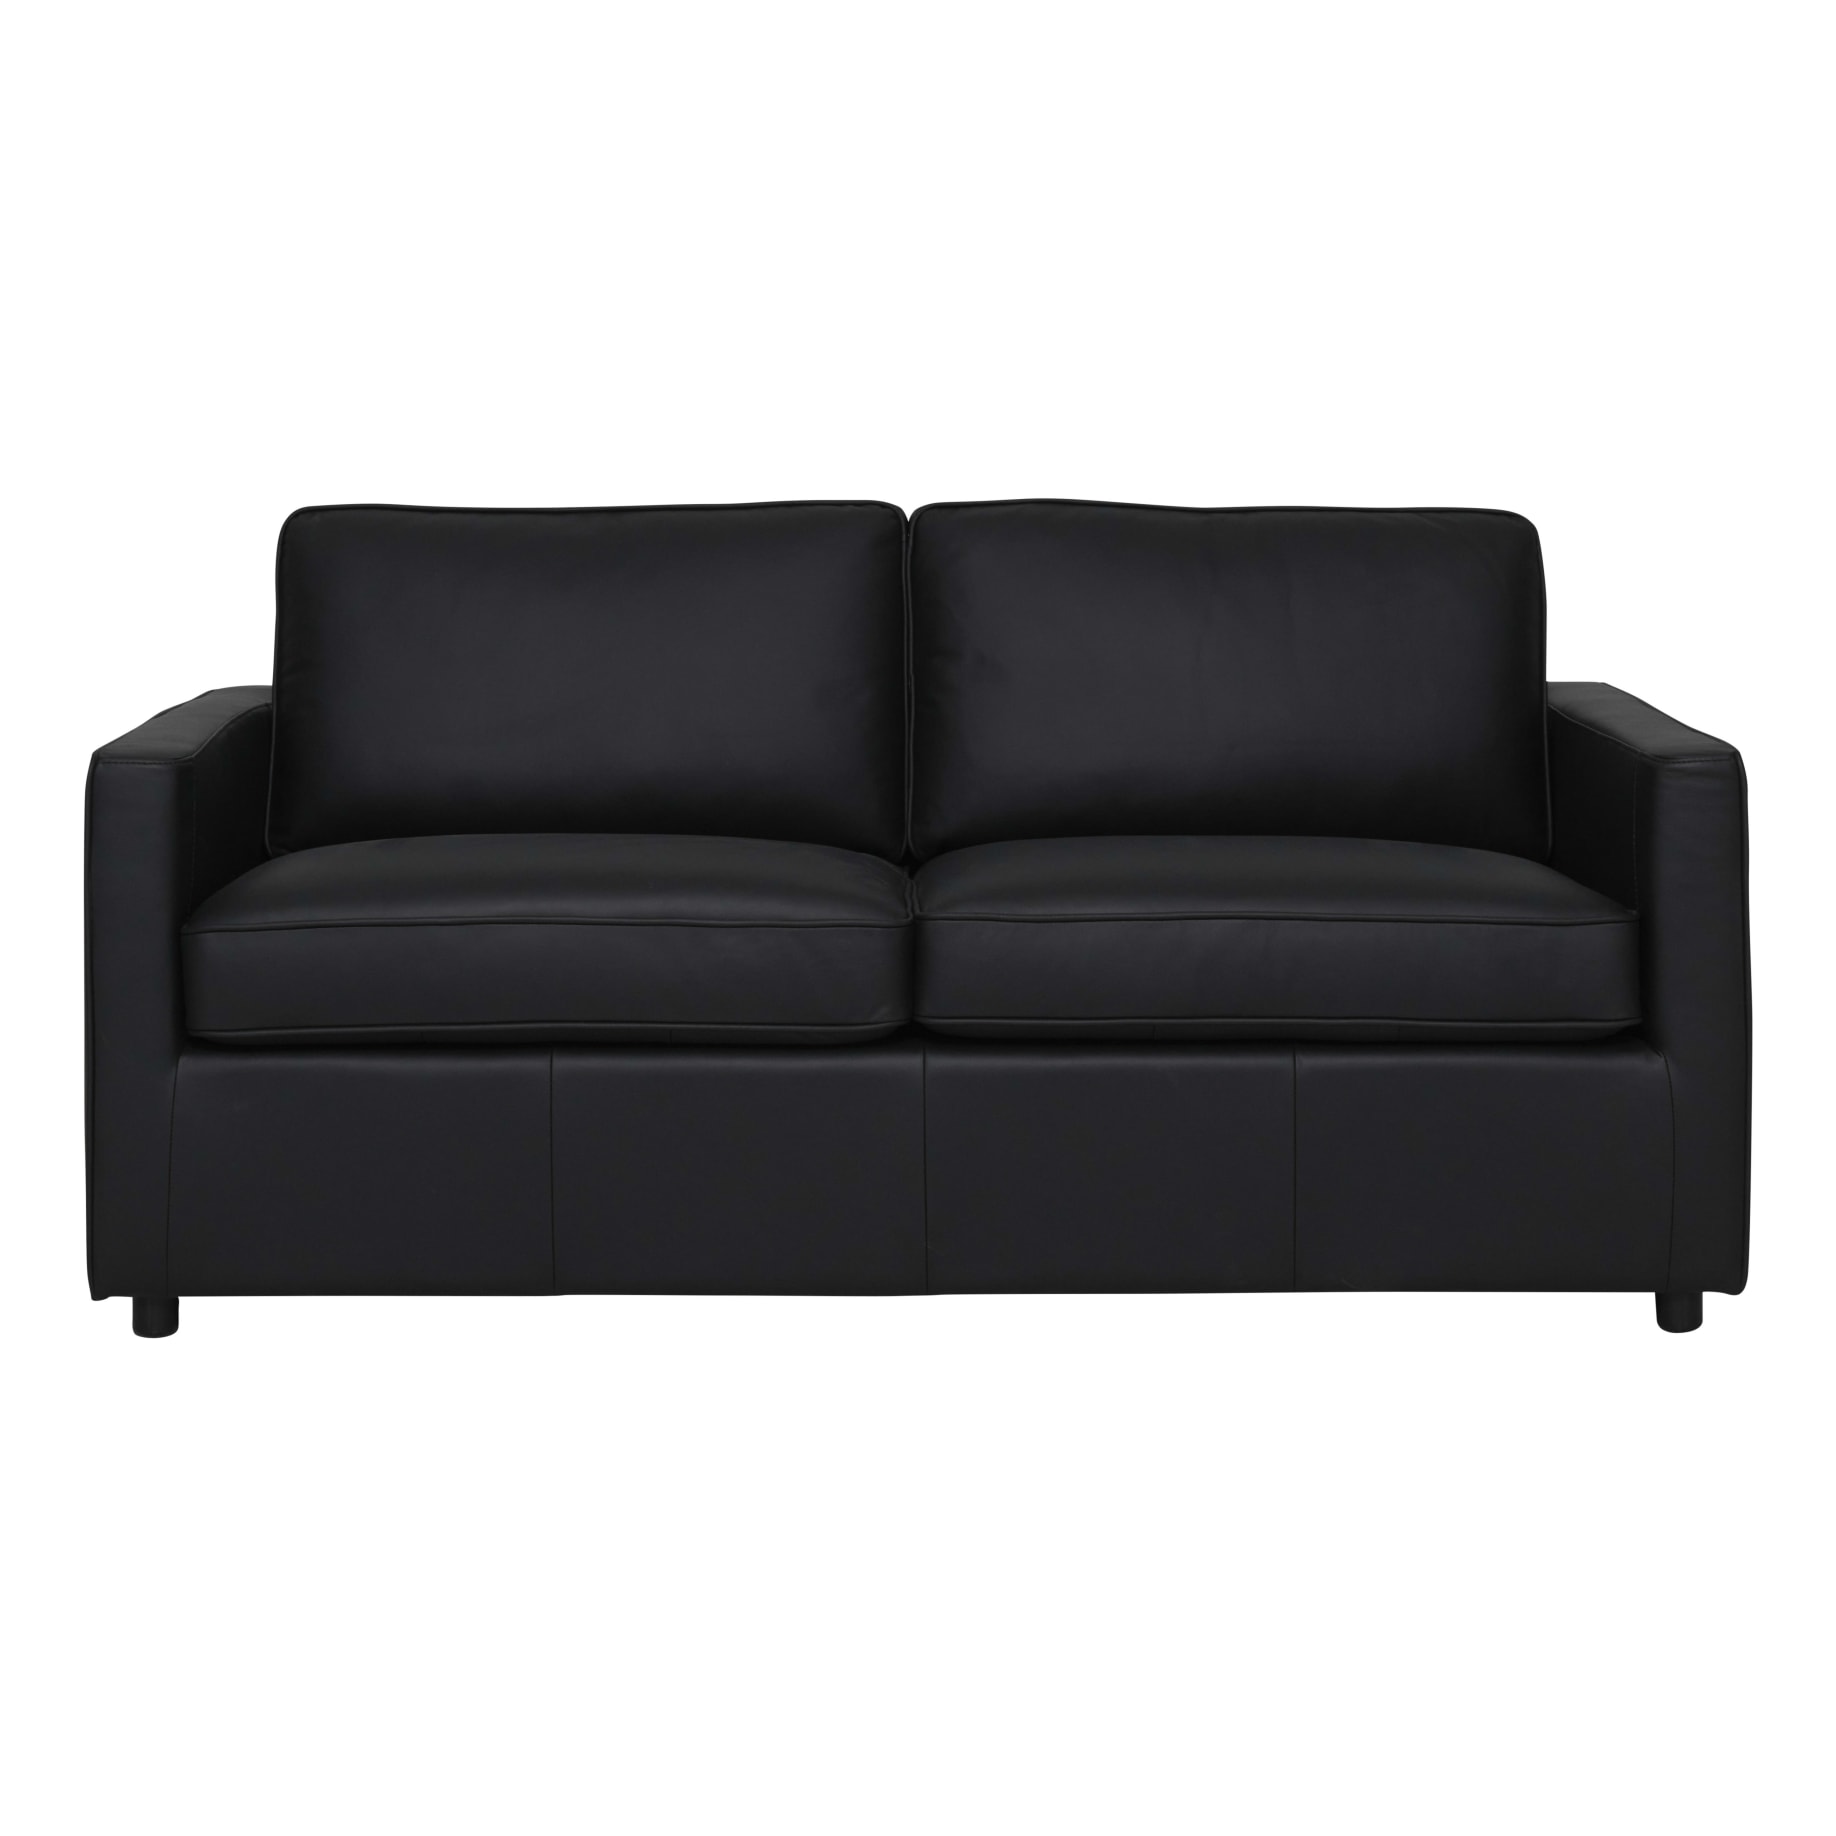 Ronin Sofabed in Leather Black